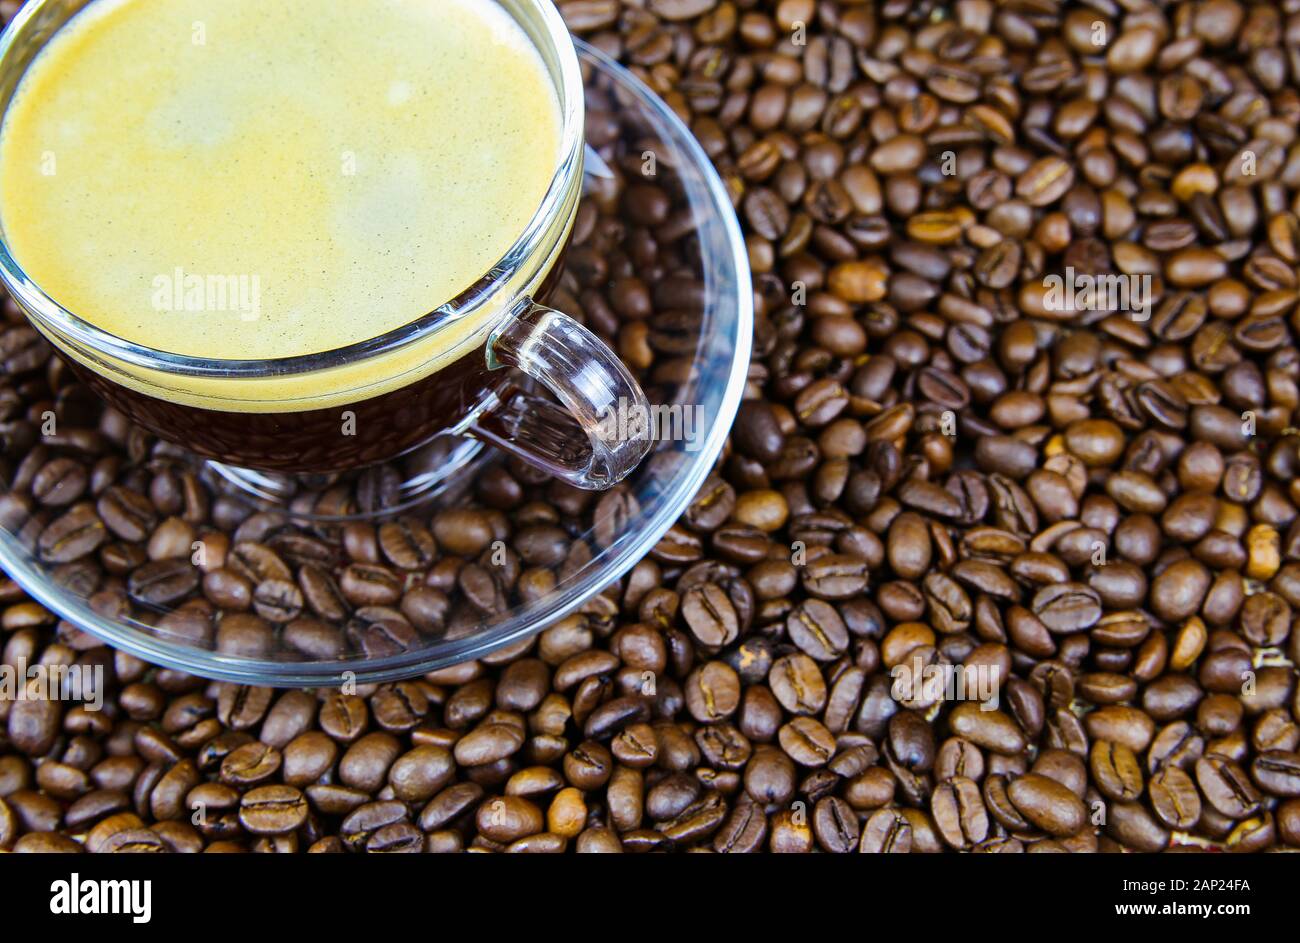 Isolated transparent coffee cup on glass saucer with cafe crema on countless roasted beans background Stock Photo